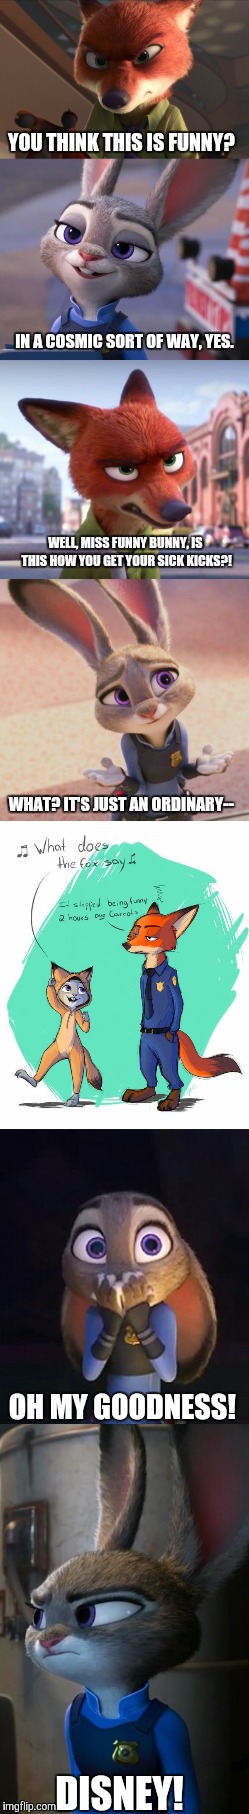 Judy Hopps' sick kicks  | YOU THINK THIS IS FUNNY? IN A COSMIC SORT OF WAY, YES. WELL, MISS FUNNY BUNNY, IS THIS HOW YOU GET YOUR SICK KICKS?! WHAT? IT'S JUST AN ORDINARY--; OH MY GOODNESS! DISNEY! | image tagged in zootopia,zootopia fox,parody,funny | made w/ Imgflip meme maker